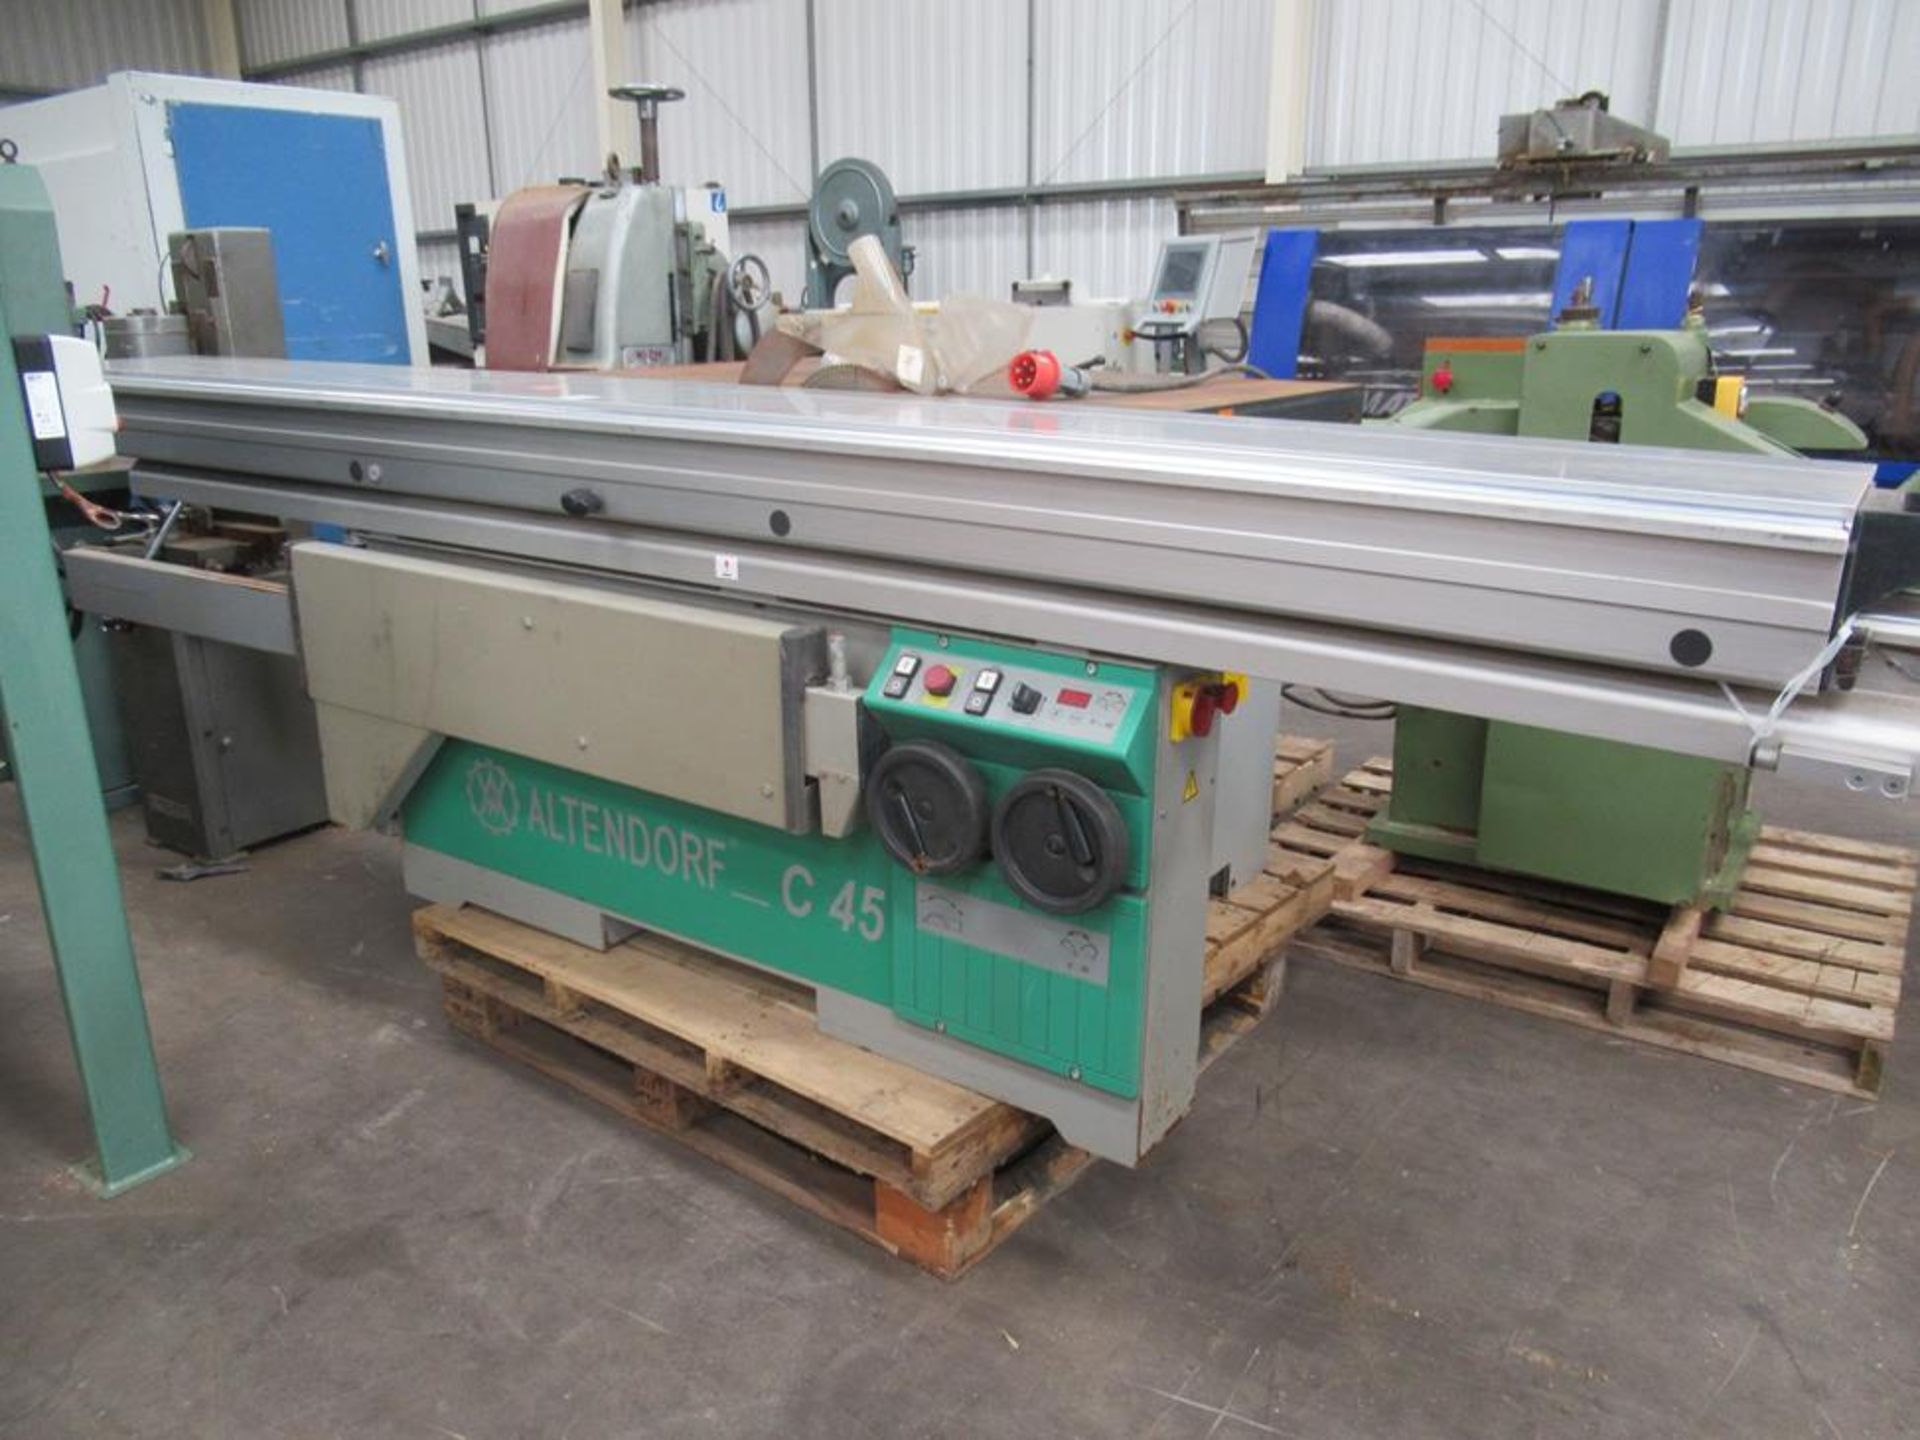 A 1998 Altendorf model C45 Tilting Arbour Panel sizing saw